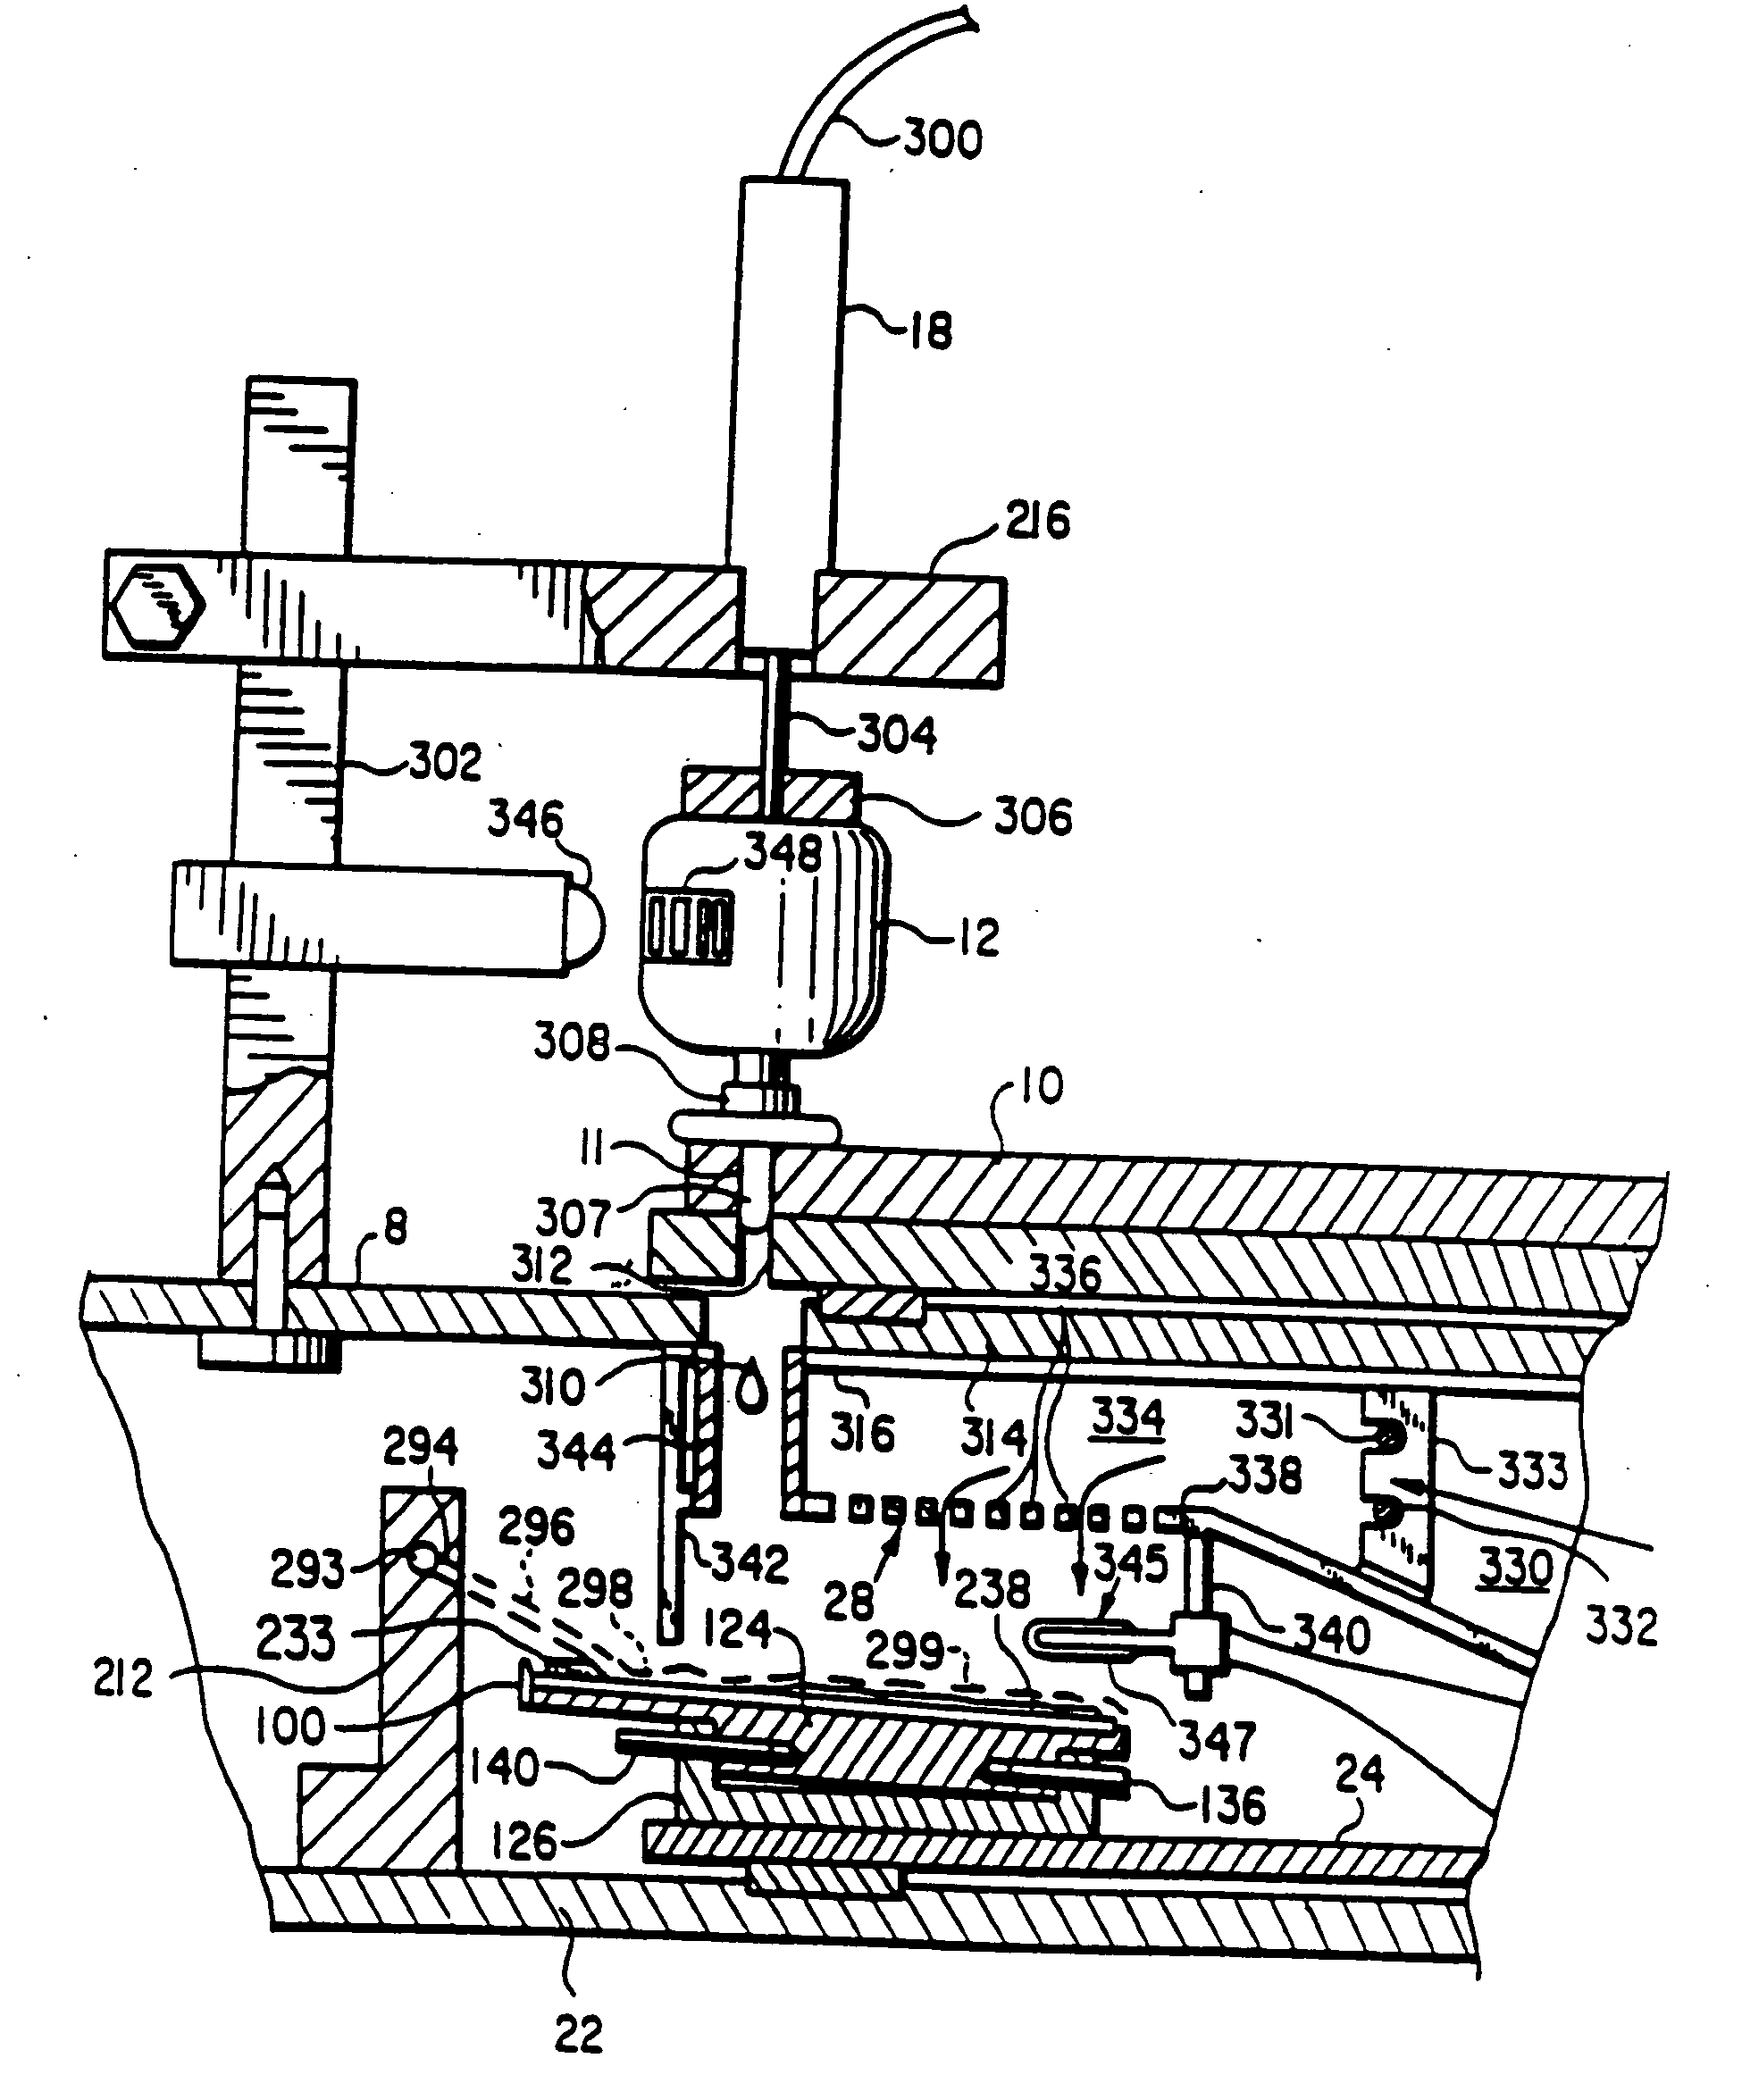 Automated biological reaction apparatus